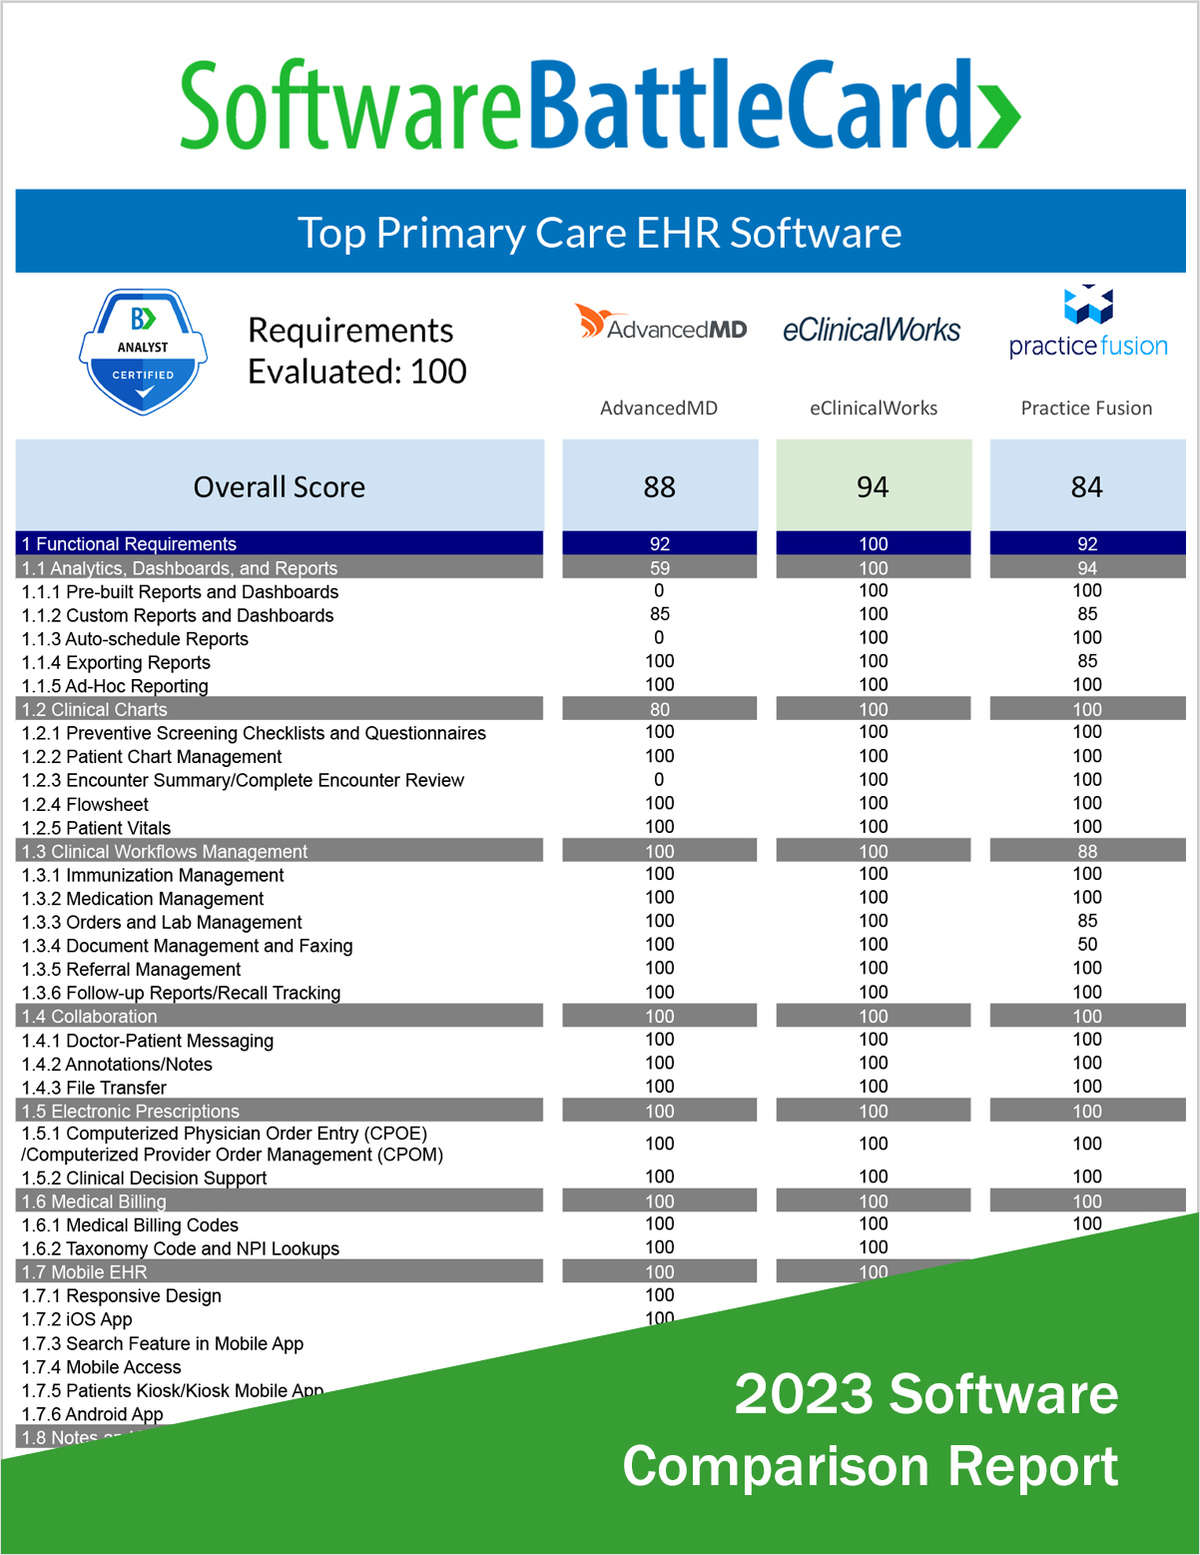 Best Primary Care EHR Software--AdvancedMD vs. eClinicalWorks vs. Practice Fusion